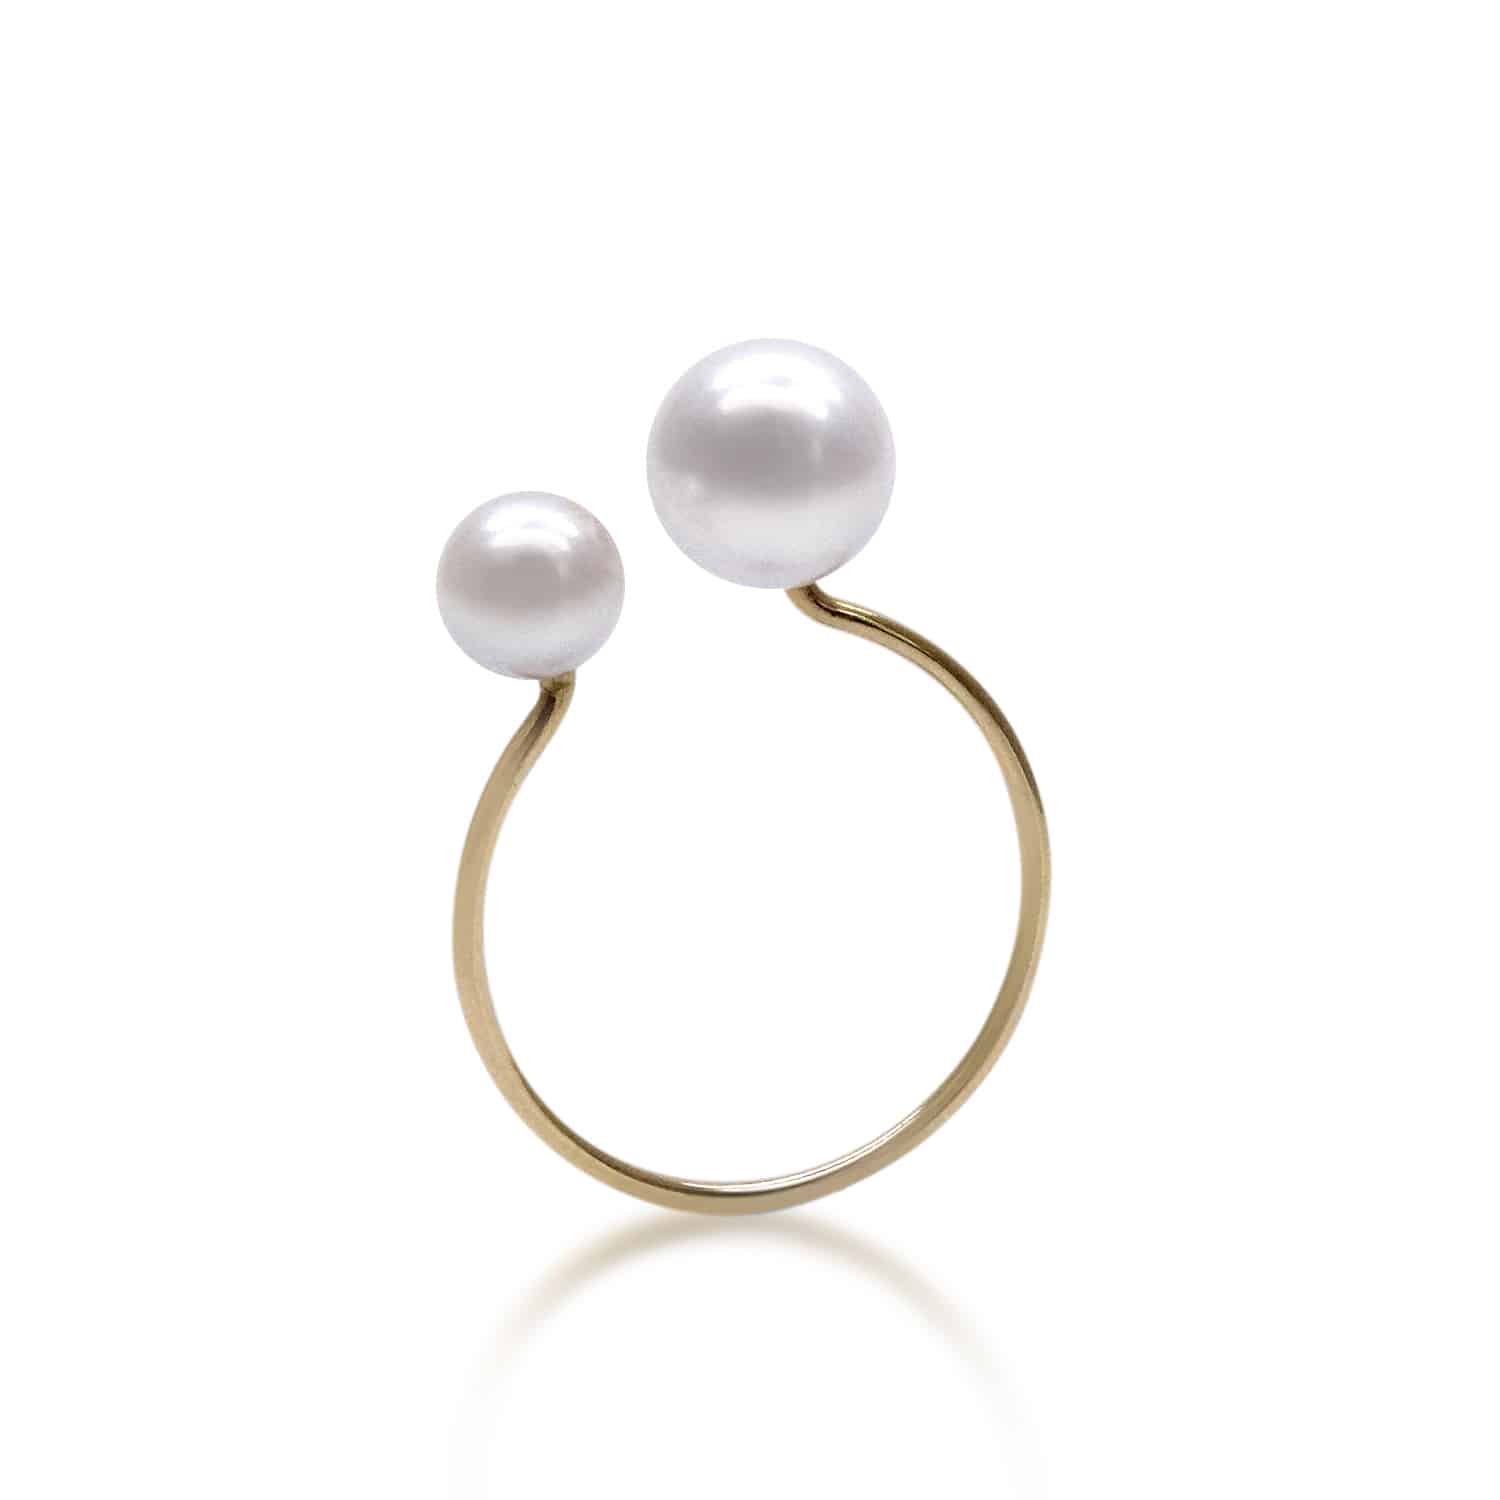 Custom Stackable Ring Designs Are Now More Popular Than Ever! | Pearl ...